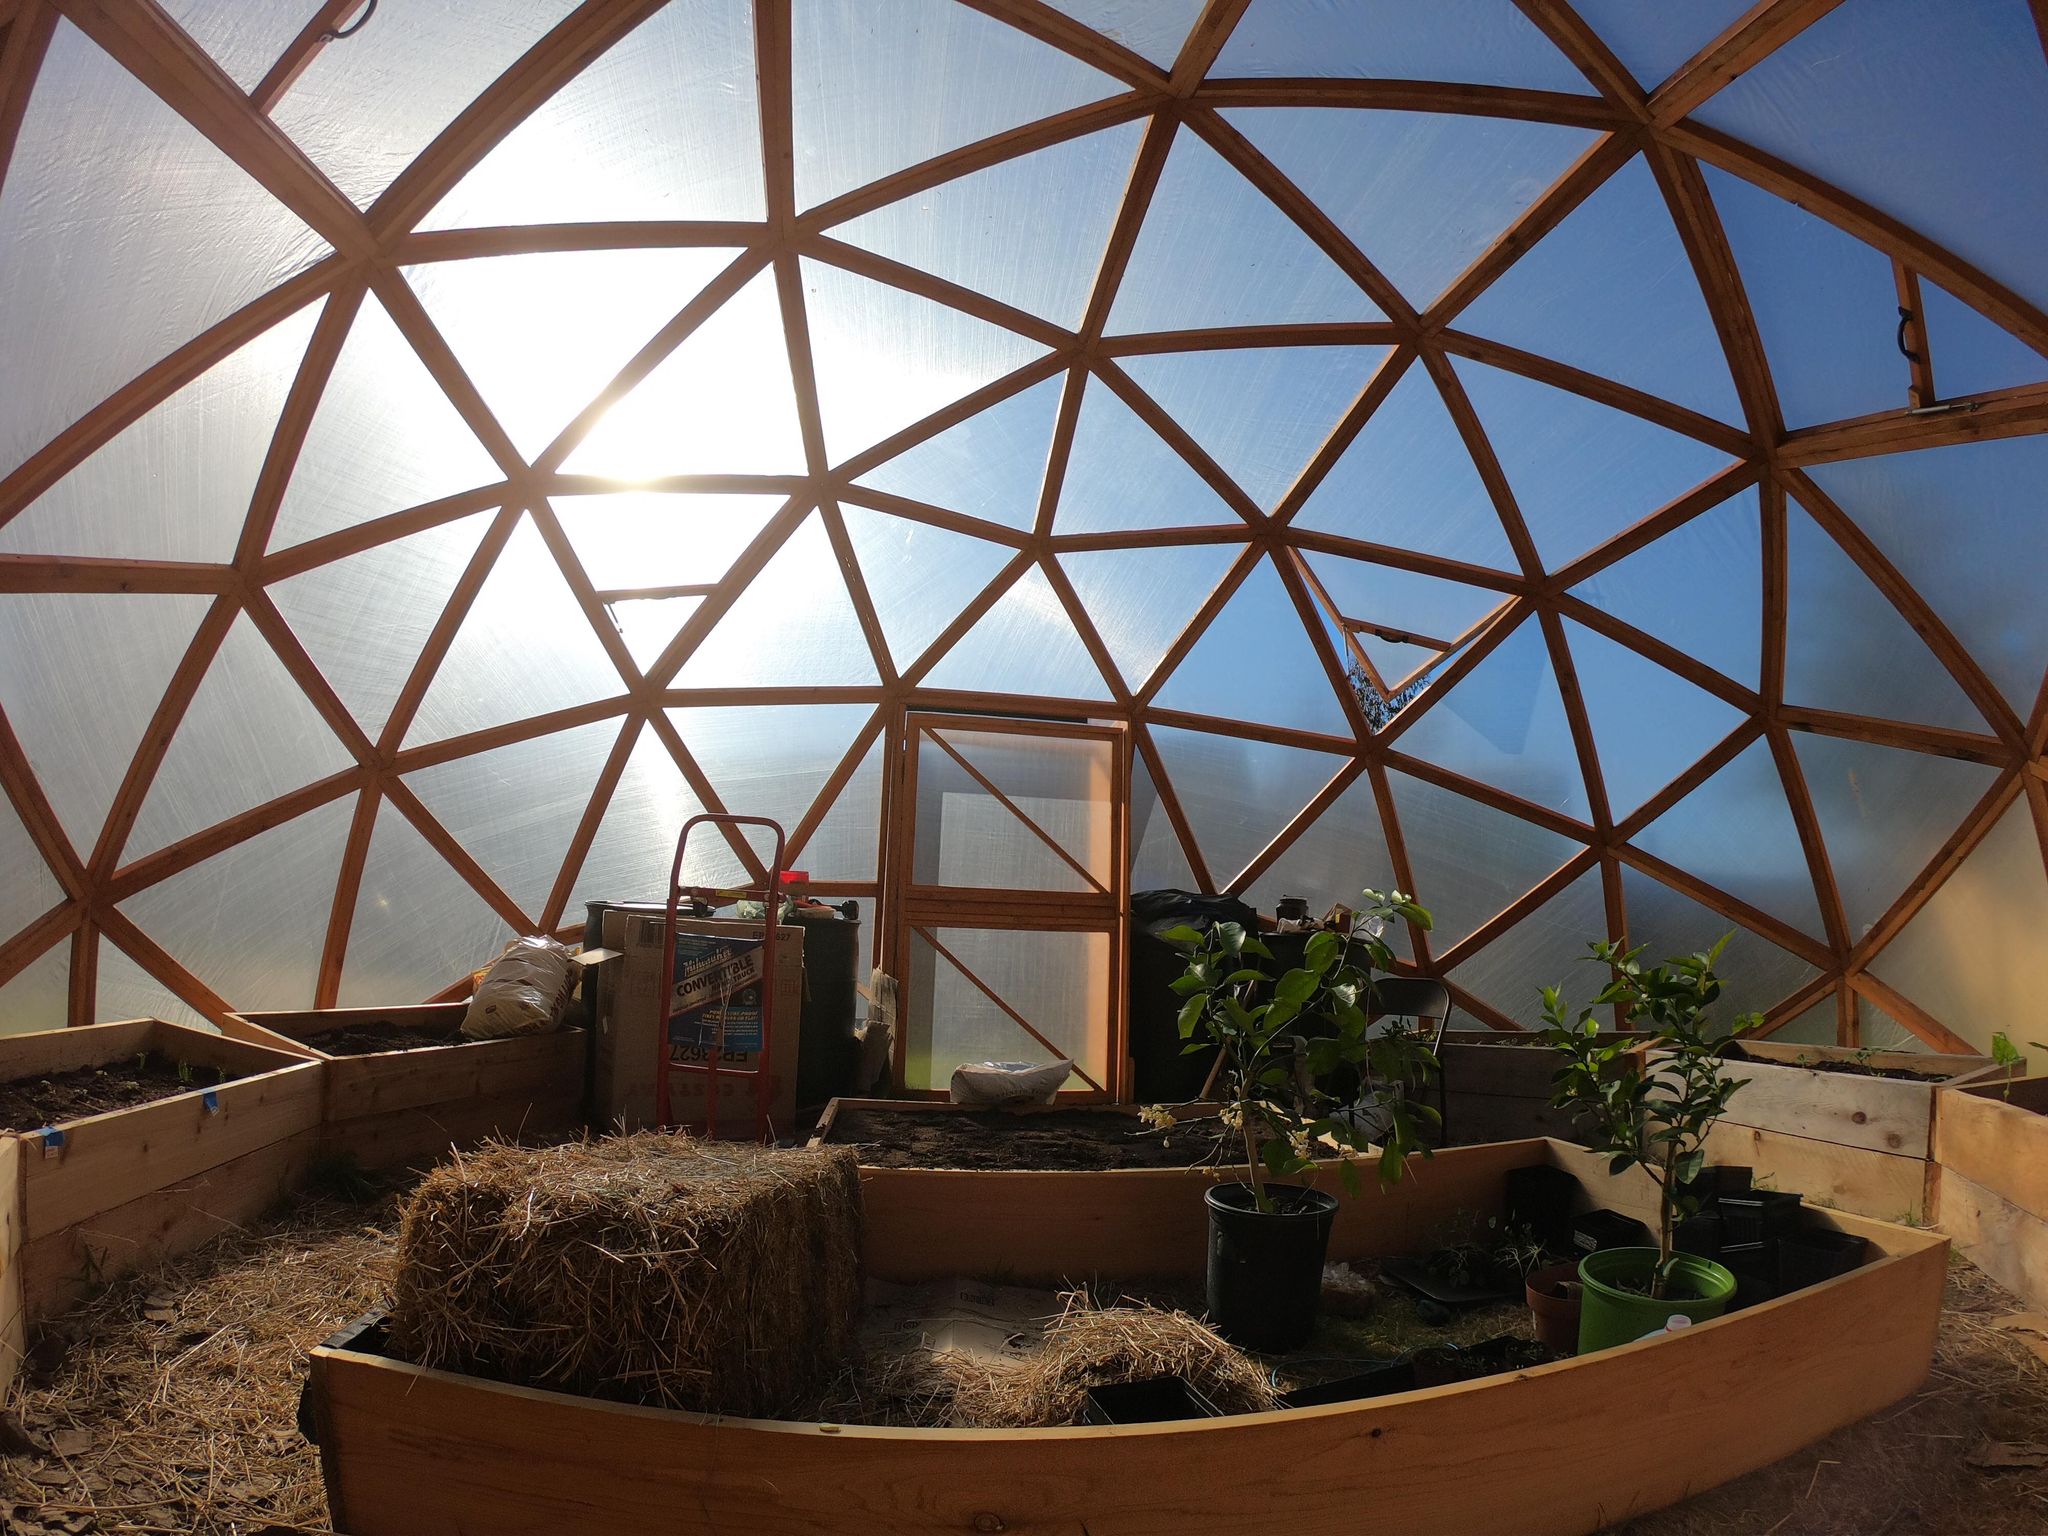 How To Build DIY Geodesic Dome Houses - Pro Explains Steps To Get One? 10